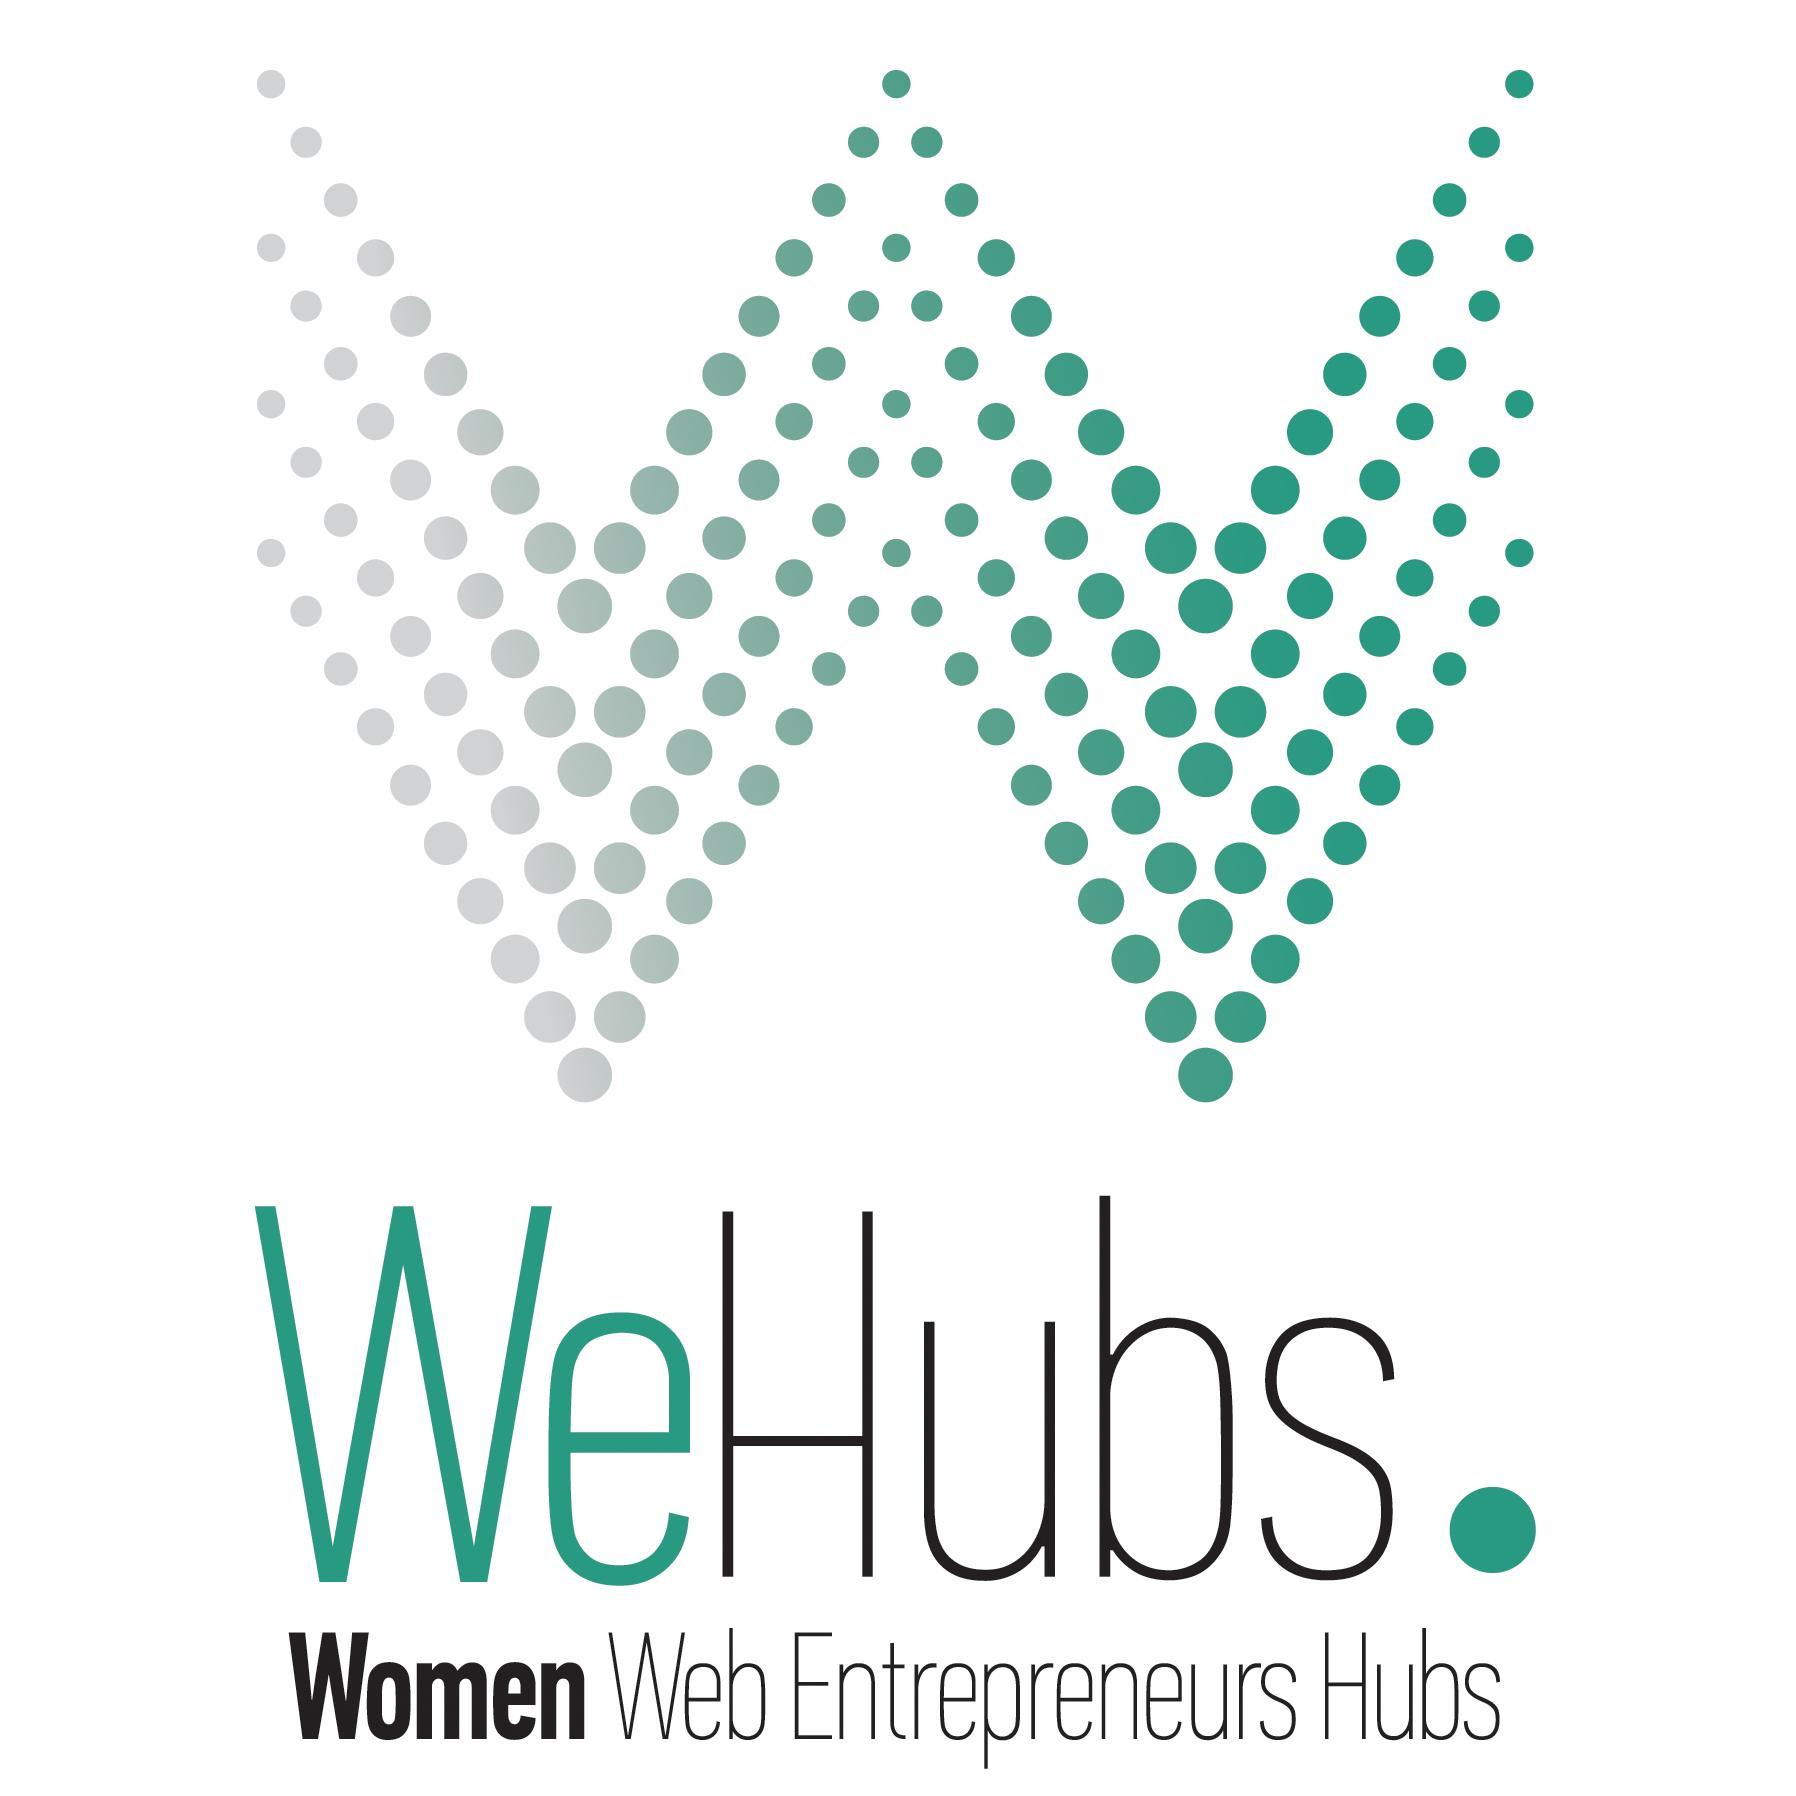 WeHubs is the First European Network of Women Web Entrepreneurs Hubs aimed at providing a strong support to women and web entrepreneur’s ecosystems in Europe.